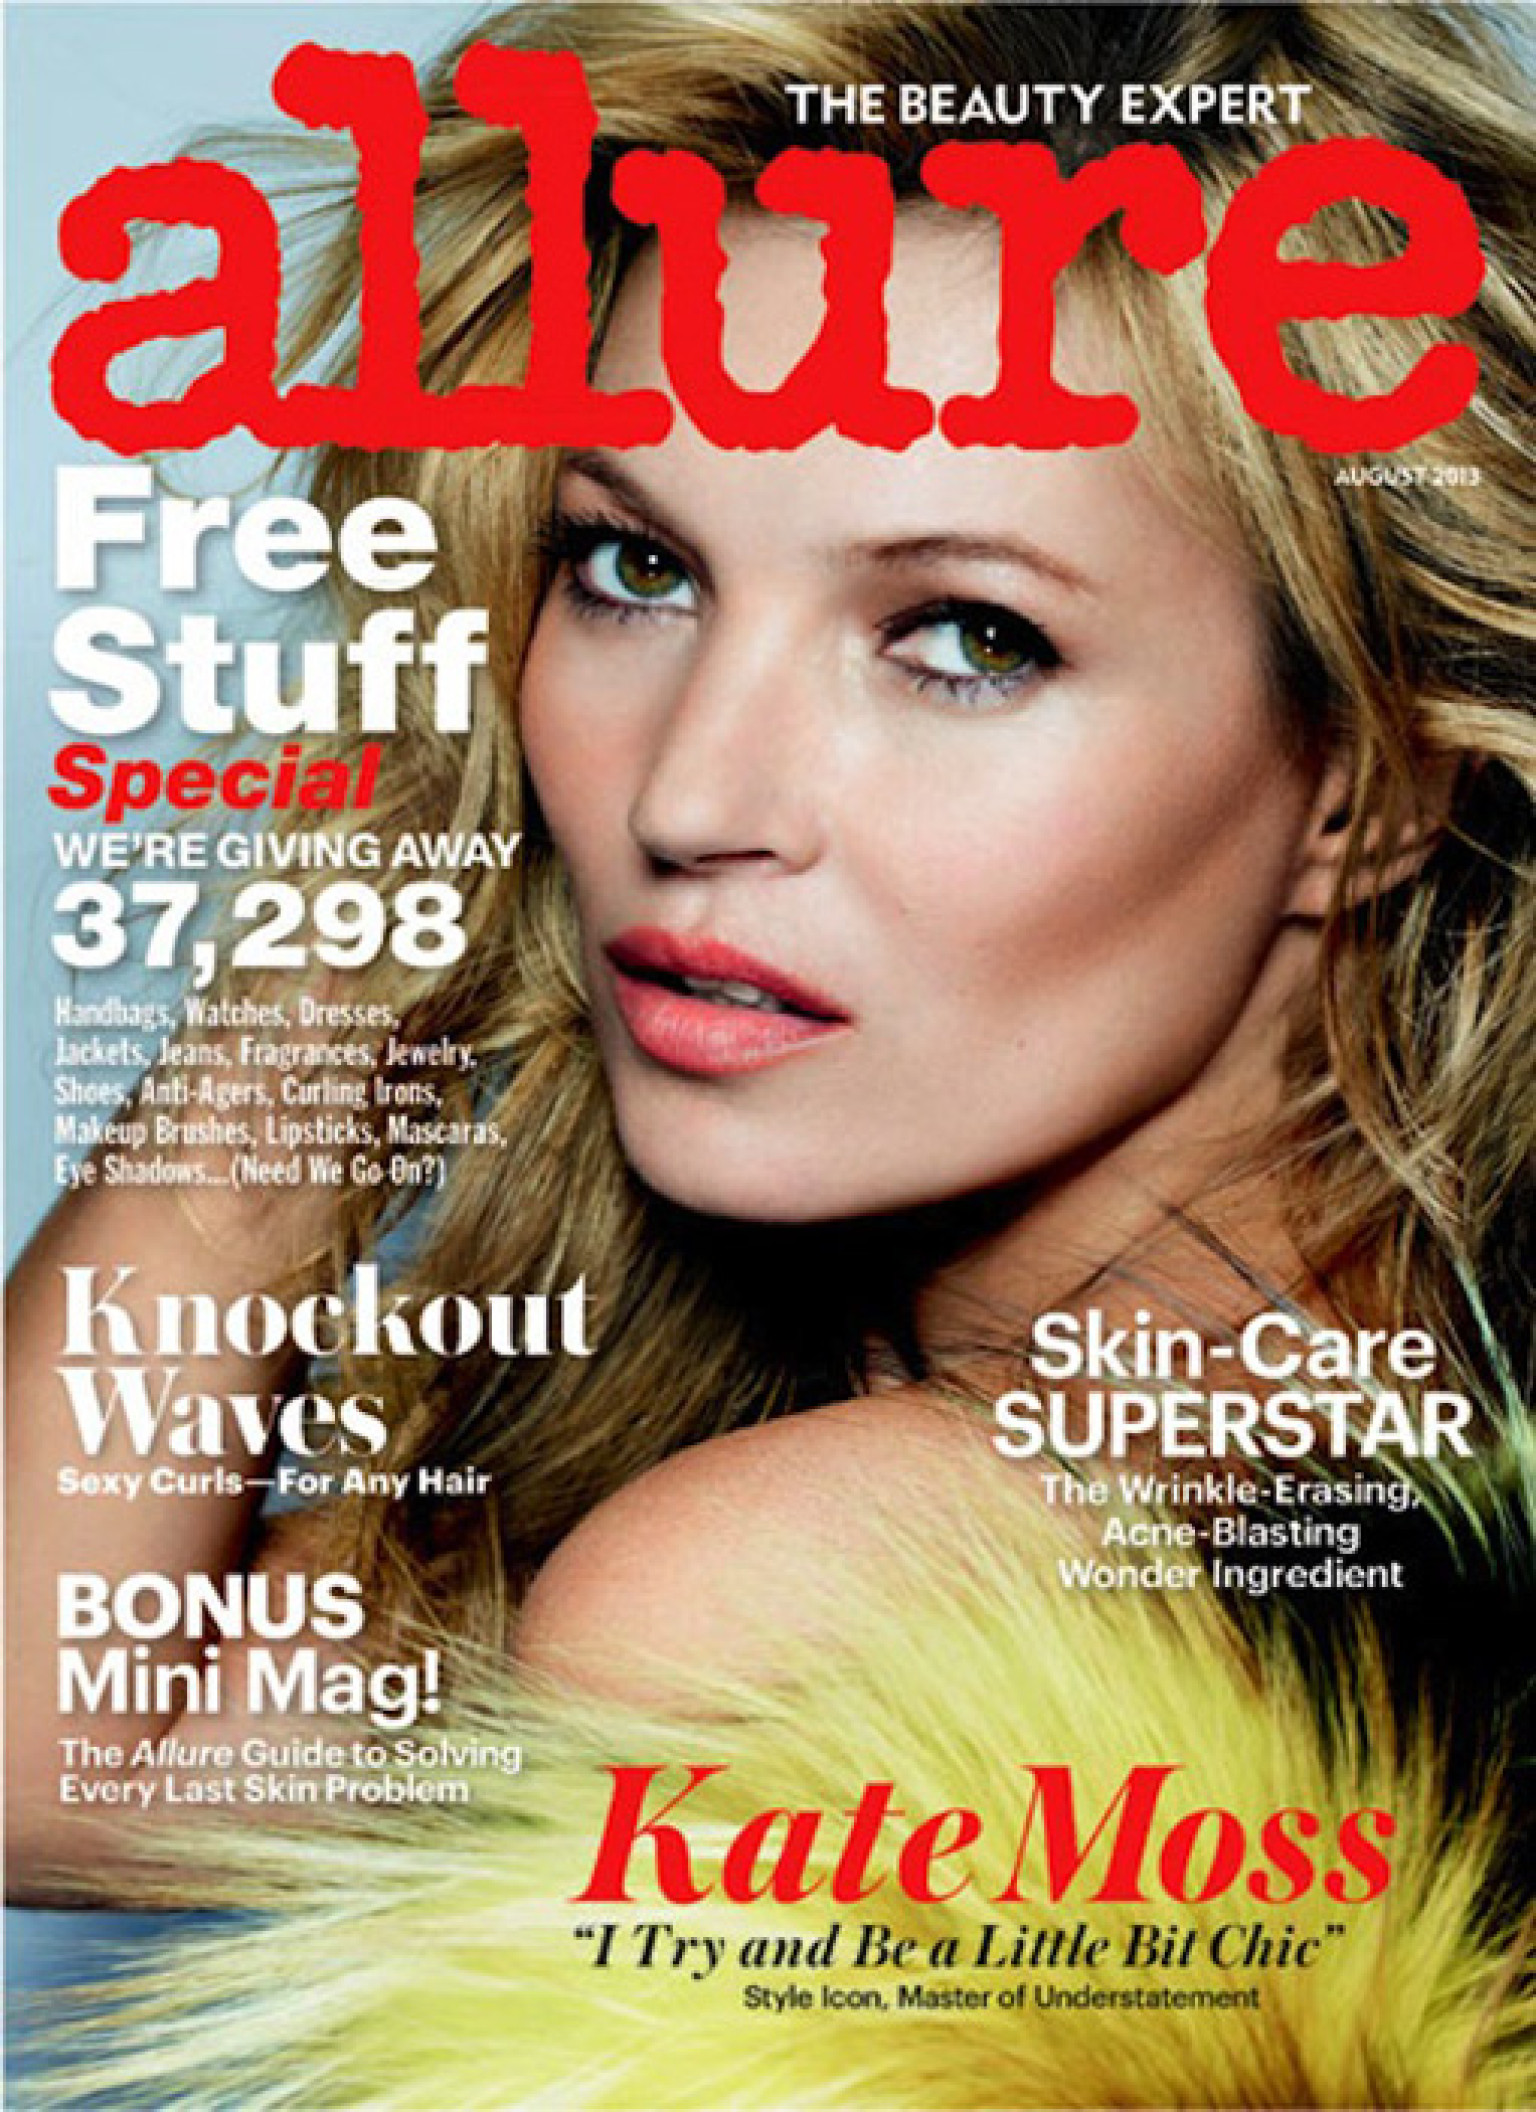 Beautiful Blonde British Fashion Model Kate Moss Modeling For The Cover Of Allure Magazine And Allure Fashion Editorials Modeling As One Of The Highest Paid Models In The World.